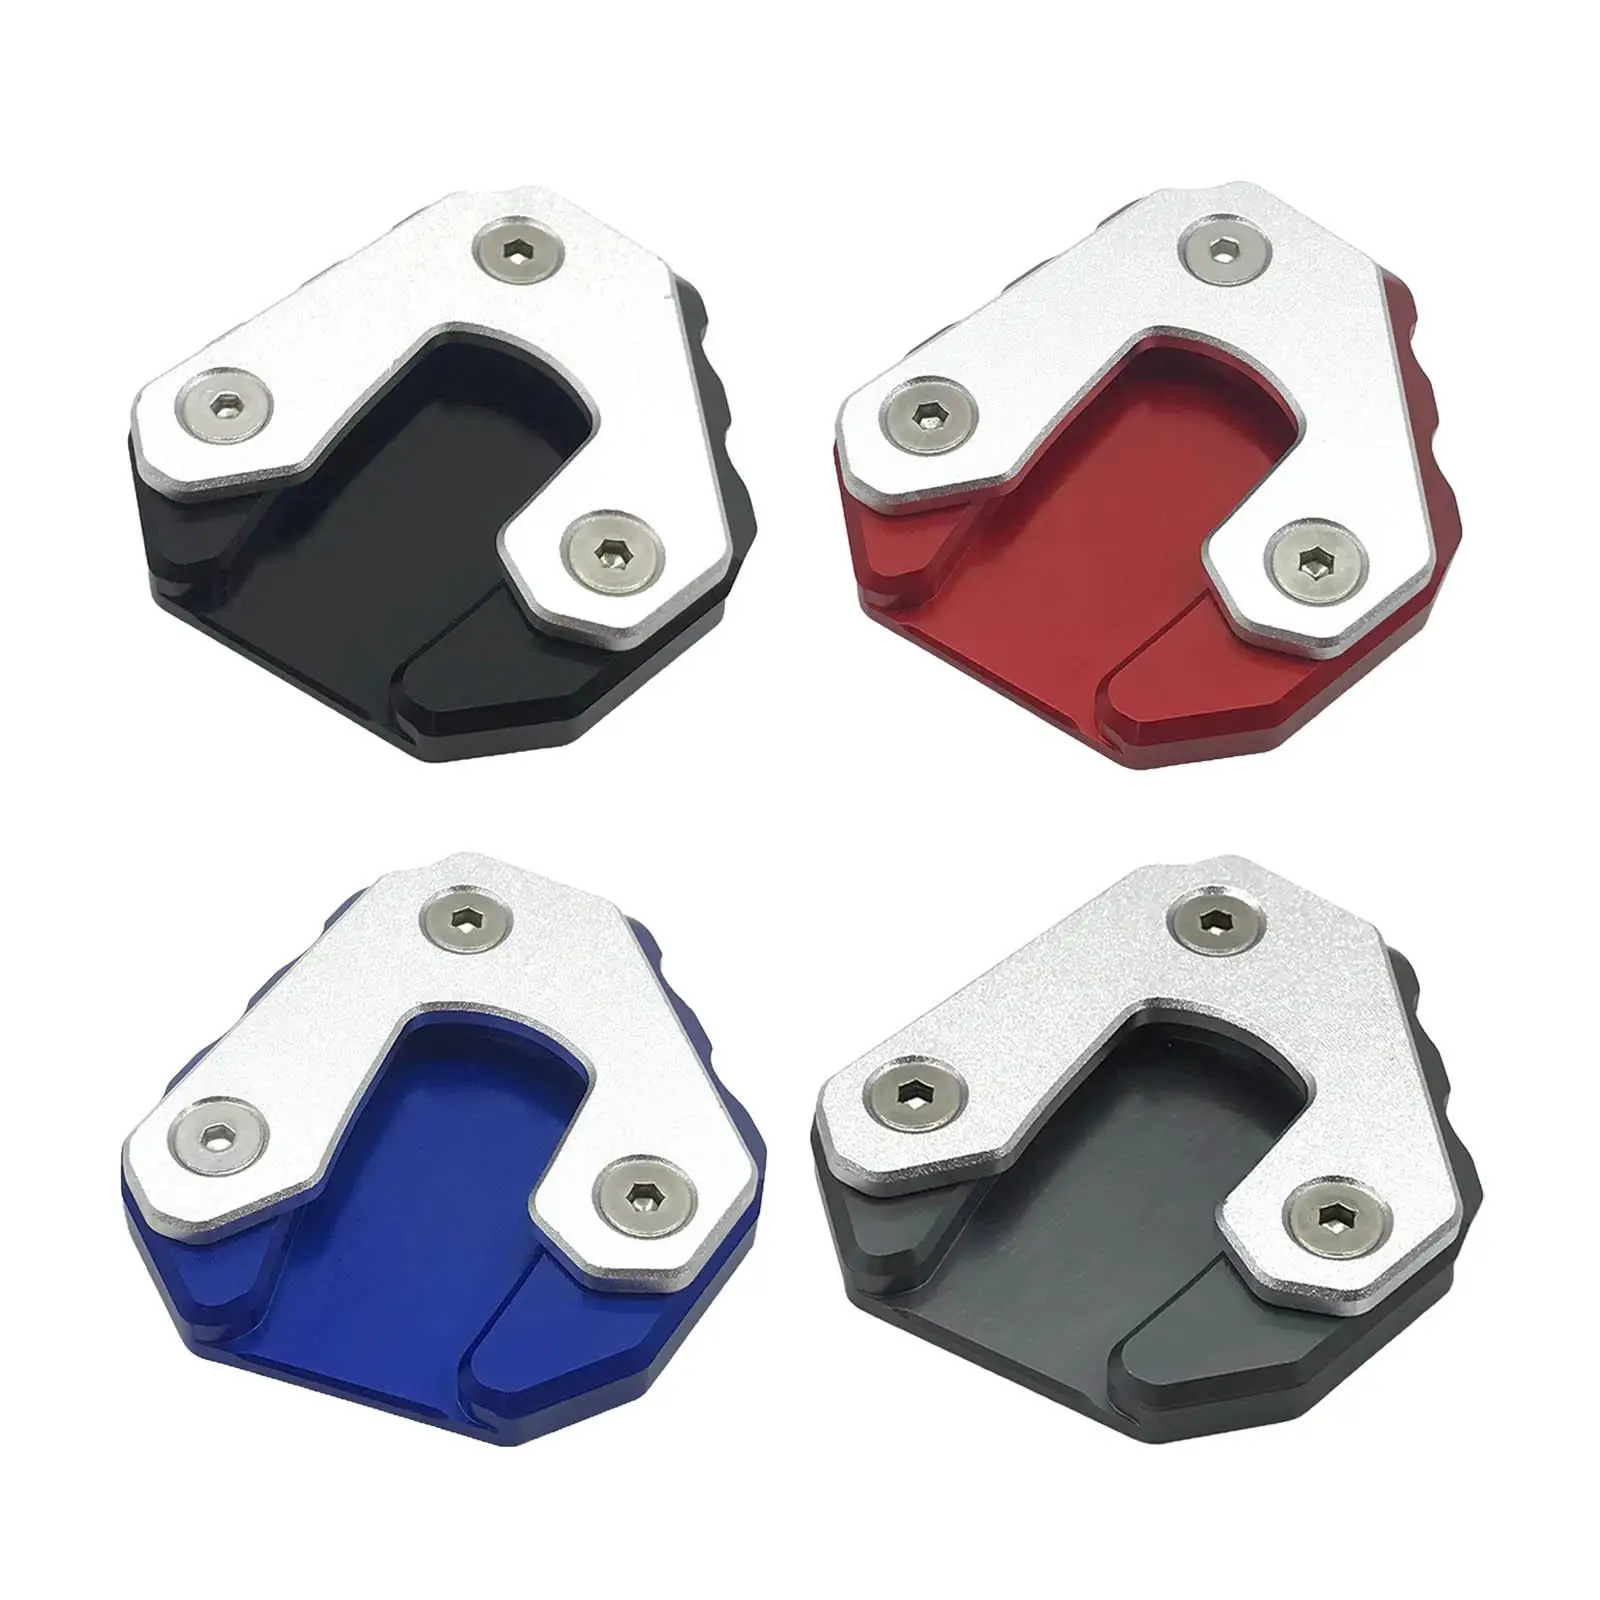 Motorcycle Side Kickstand Enlarger Plate Pad Aluminum Fit for Kymco Krv 180 2021 Krv180 Accessories Motocross Foot Side Stand